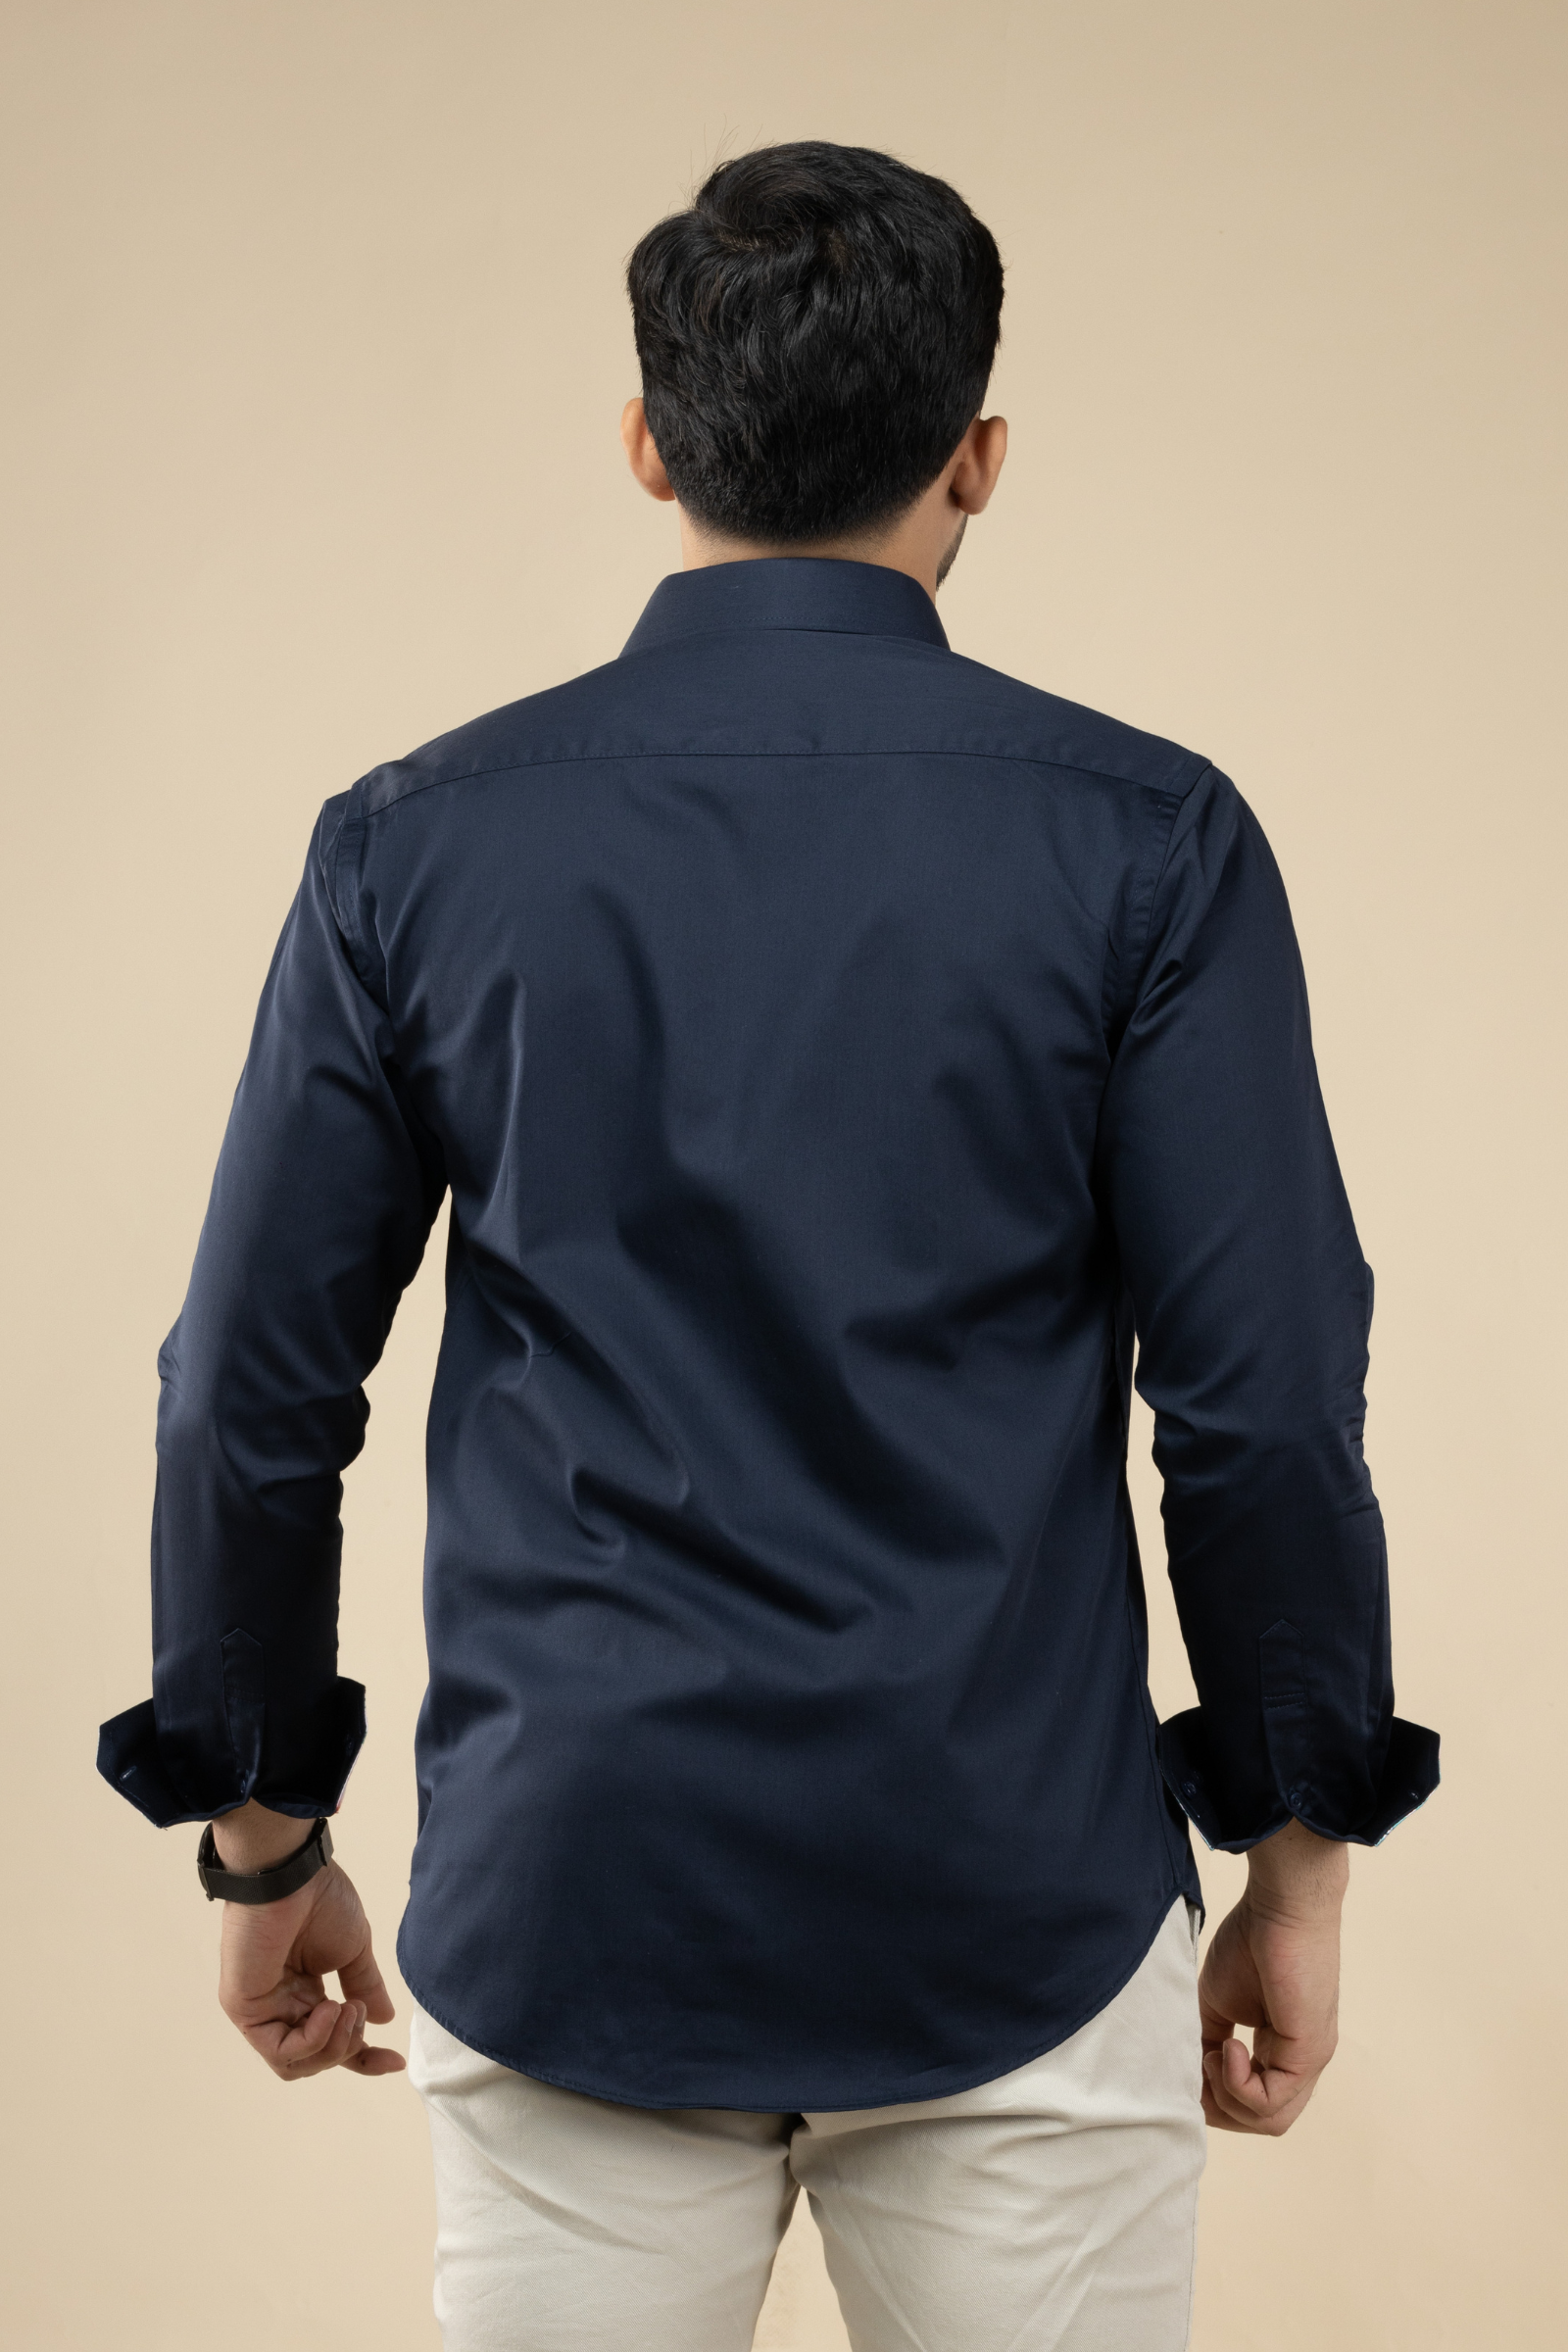 Navy Blue Satin Shirt with Inner Collar Cuff Contrast